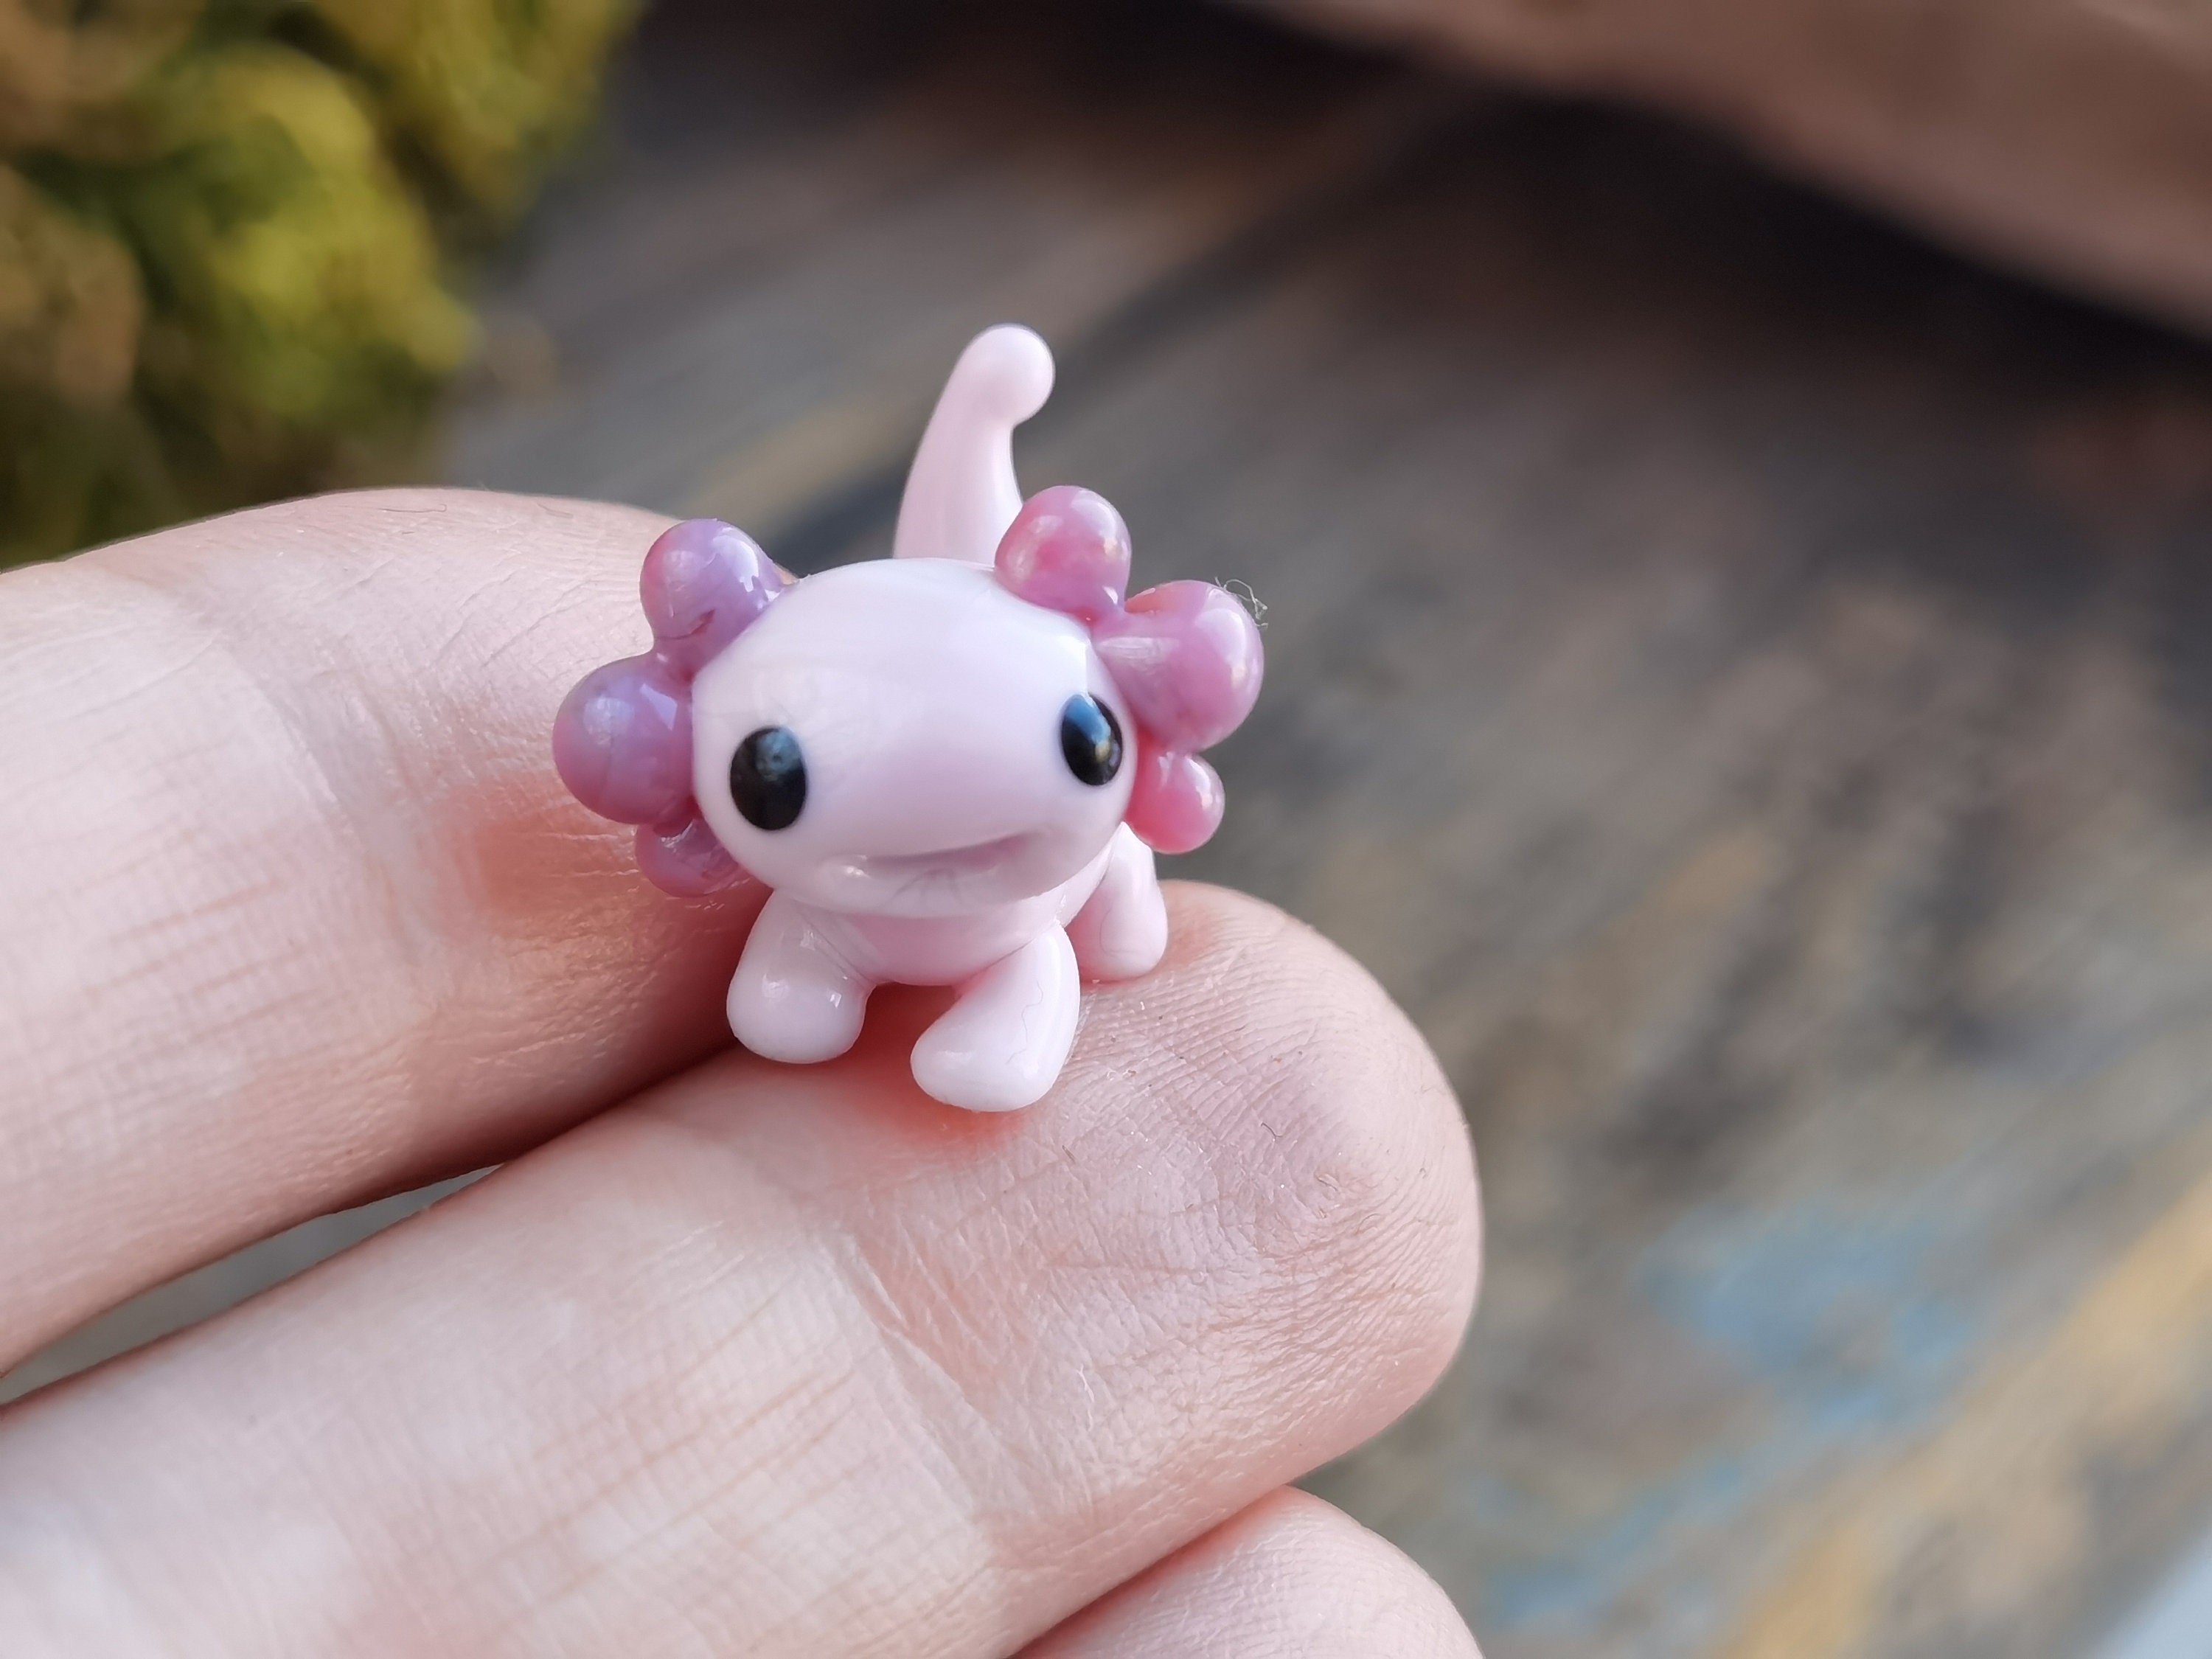 5pcs Pink Axolotl Miniatures - Resin Cabochons for Slime or Decoden - Mini  Fairy Garden Animals - Slime Charms